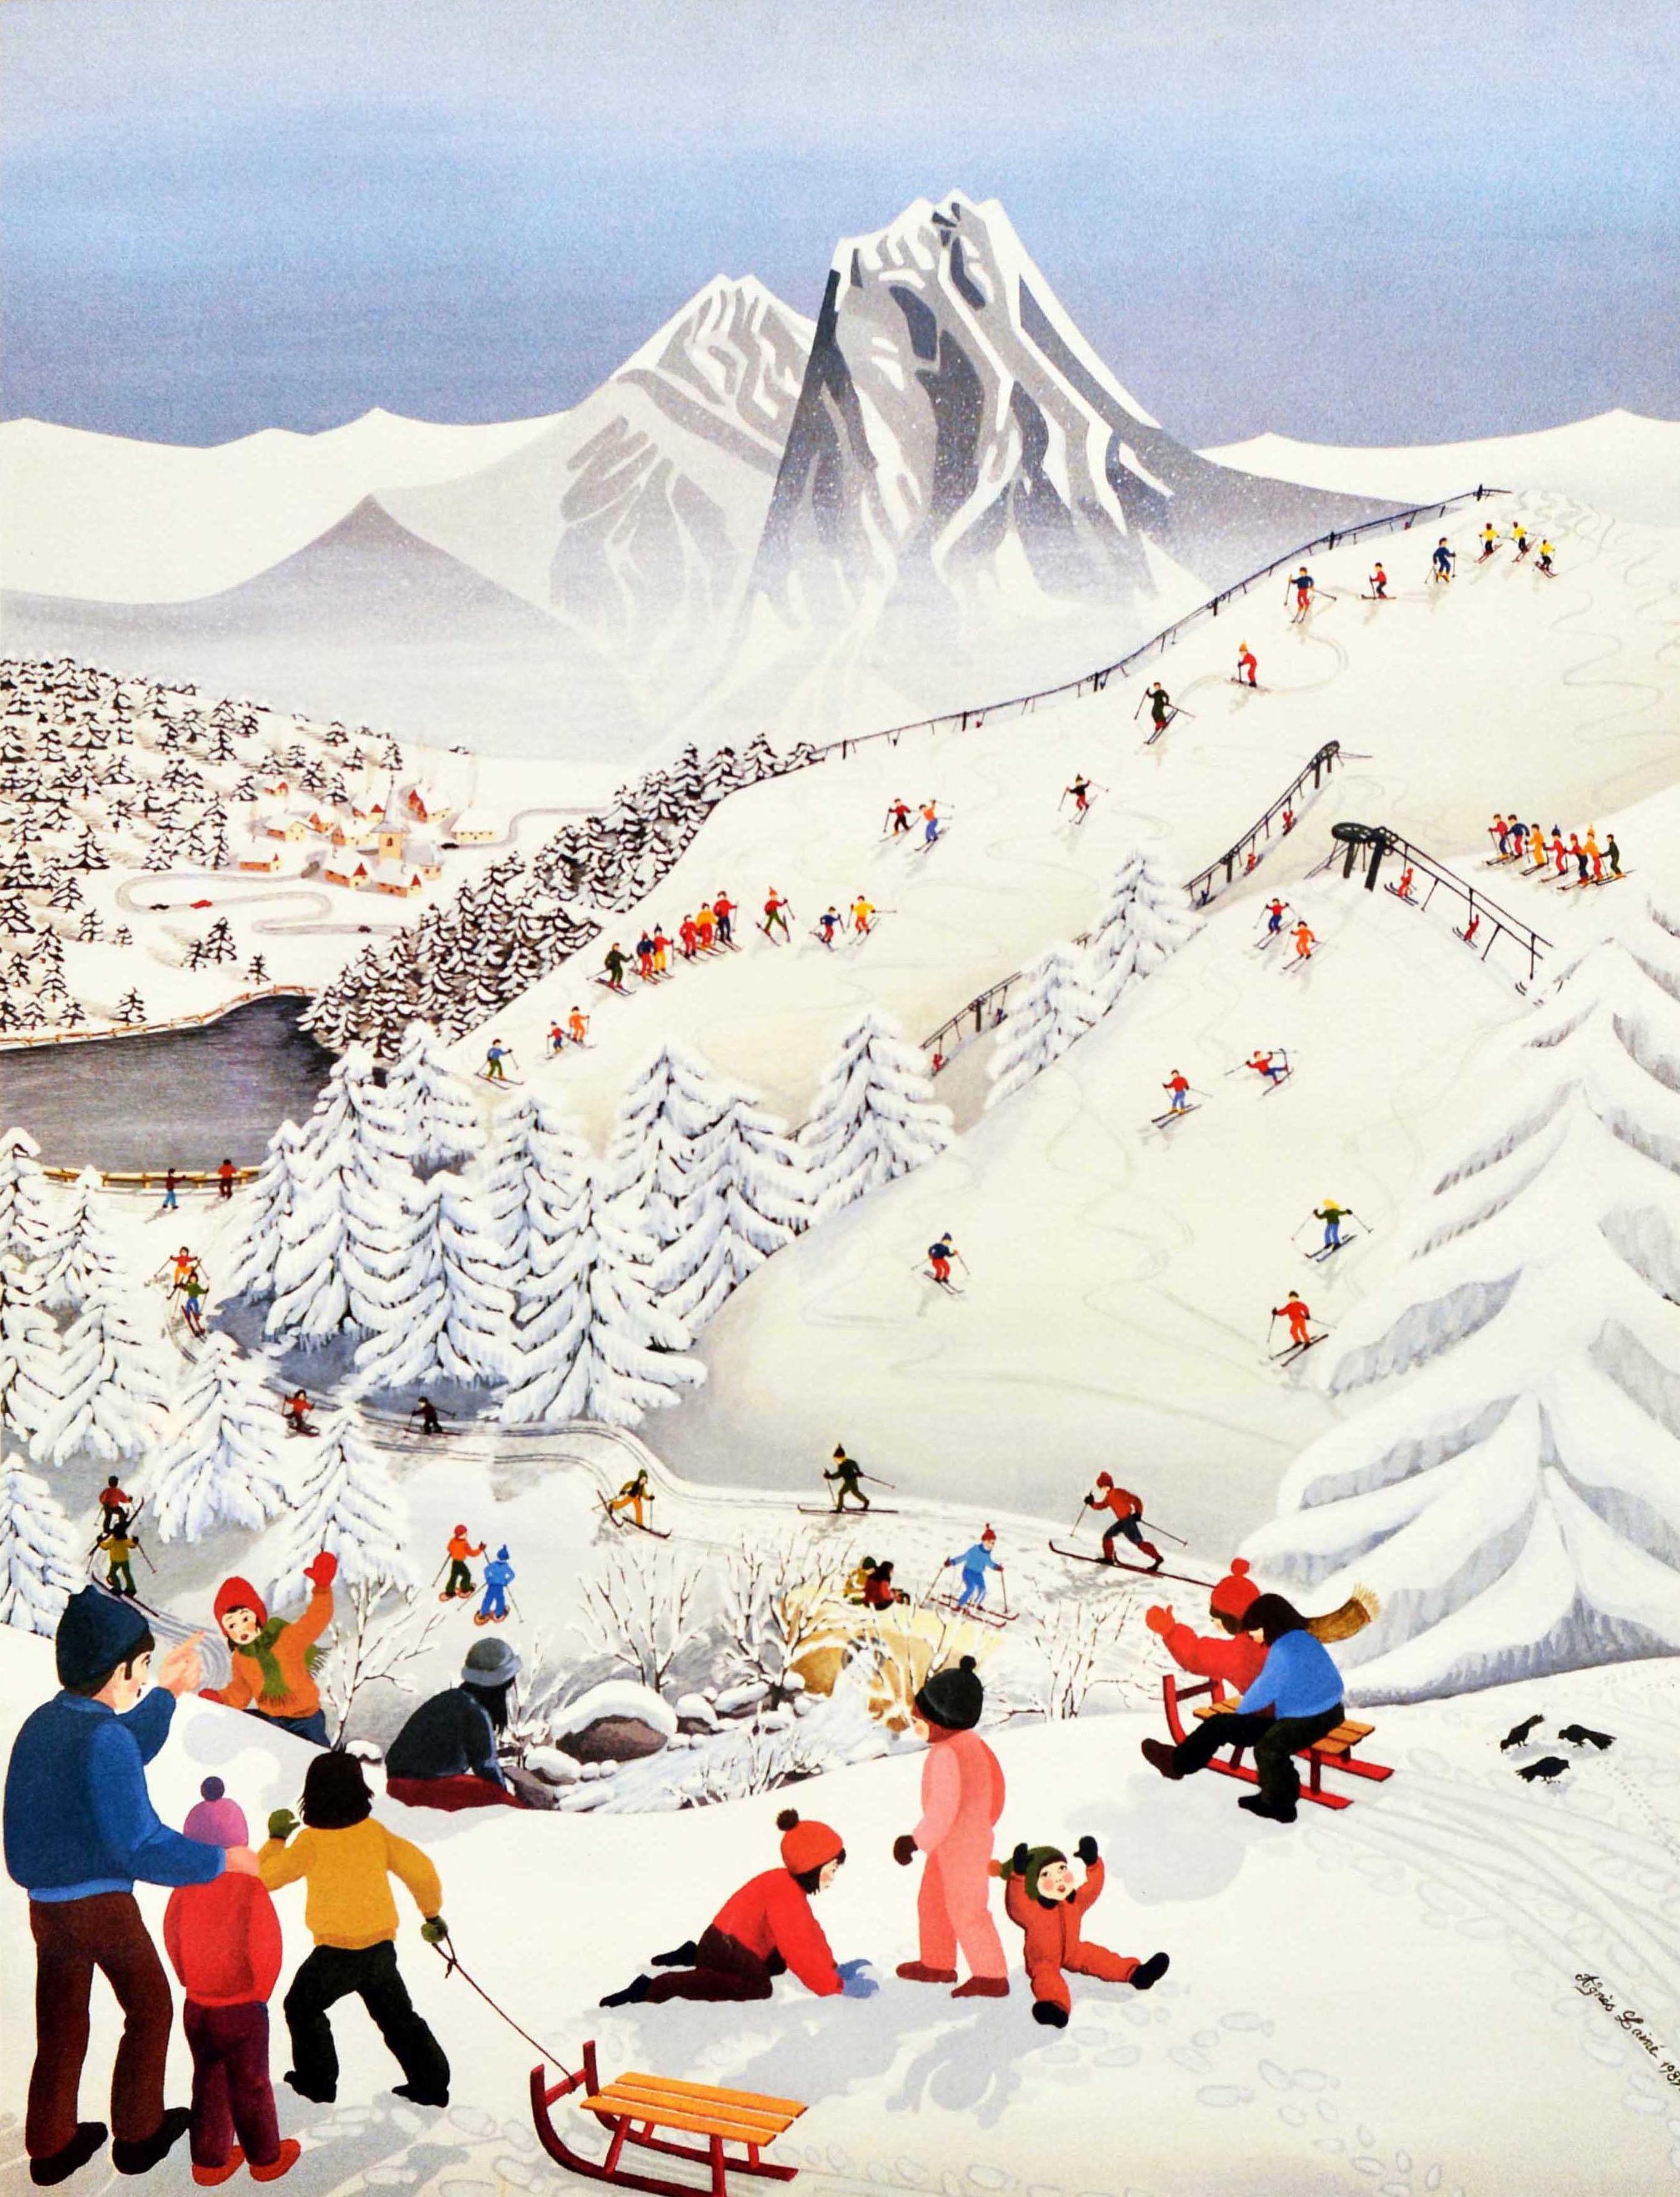 Original vintage winter sport travel poster for a ski resort in the French Alps - En Savoie Les Karellis - featuring a fun and colourful illustration of children and families sledging in the foreground with skiers skiing down the slopes by T-bar ski